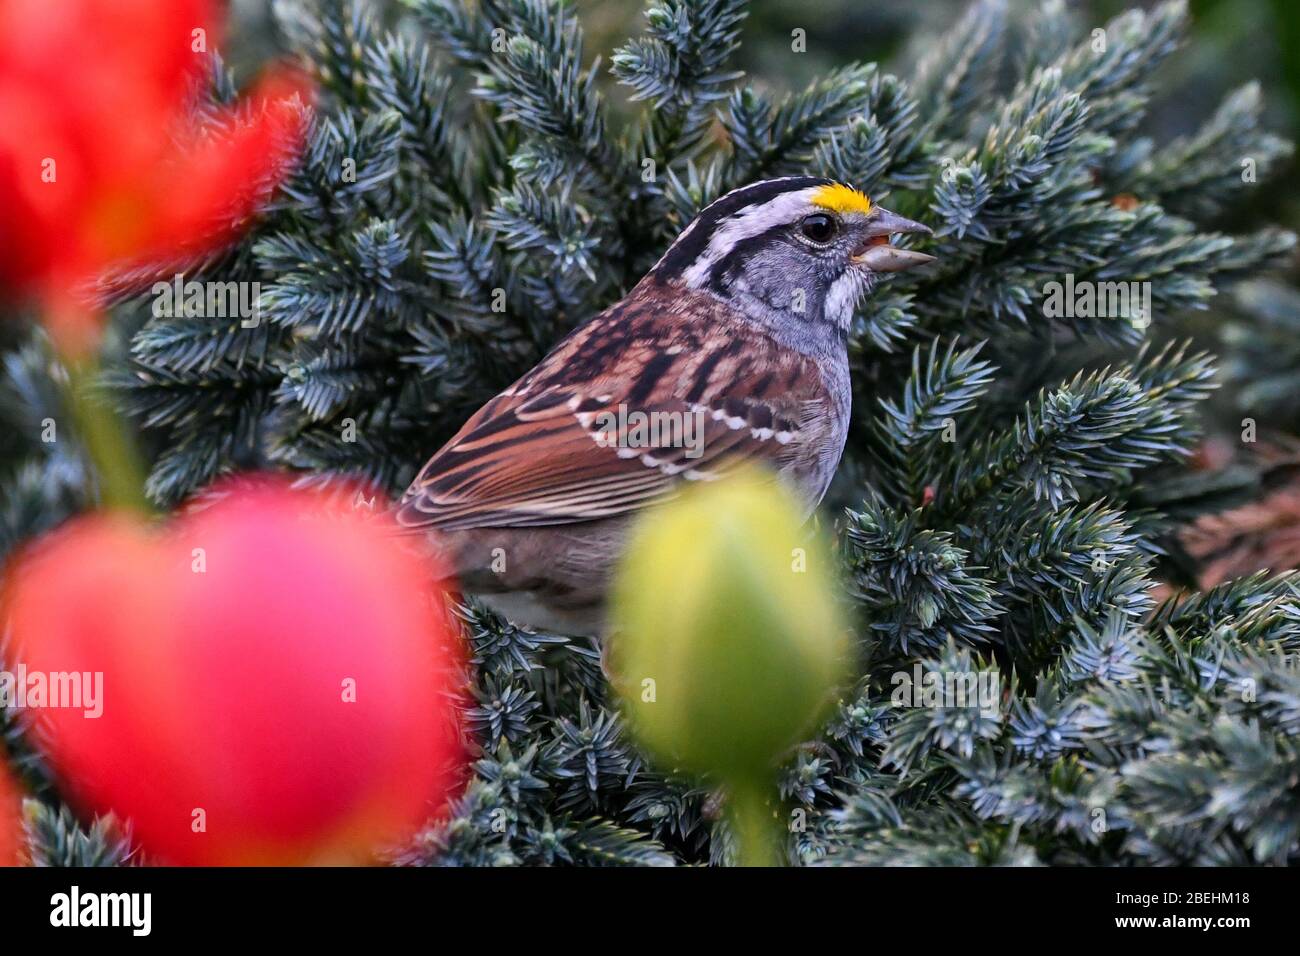 White Throated Sparrow - brown songbird with yellow patch spring garden - Zonotrichia albicollis or white-throated American sparrow - Passerellidae. Stock Photo